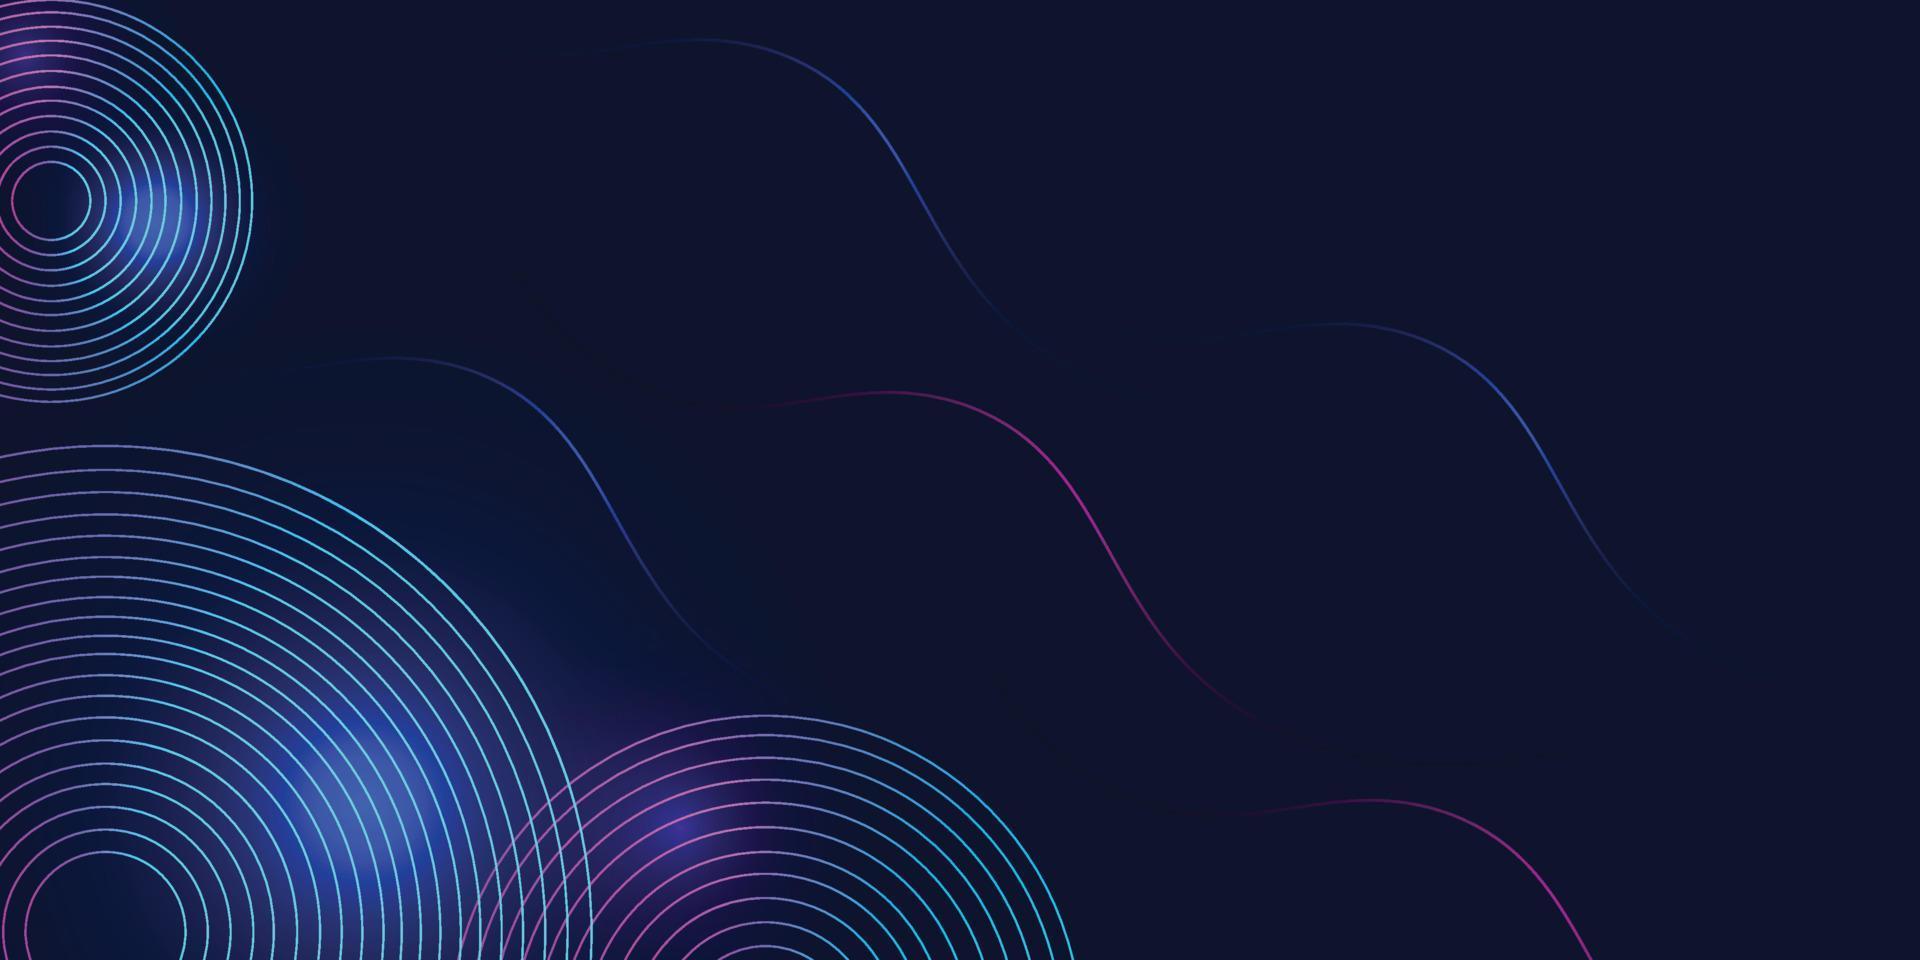 Blue and purple Digital futuristic technology concept background use for business, corporate, institution, poster, template, party, festive, seminar, vector, illustration vector